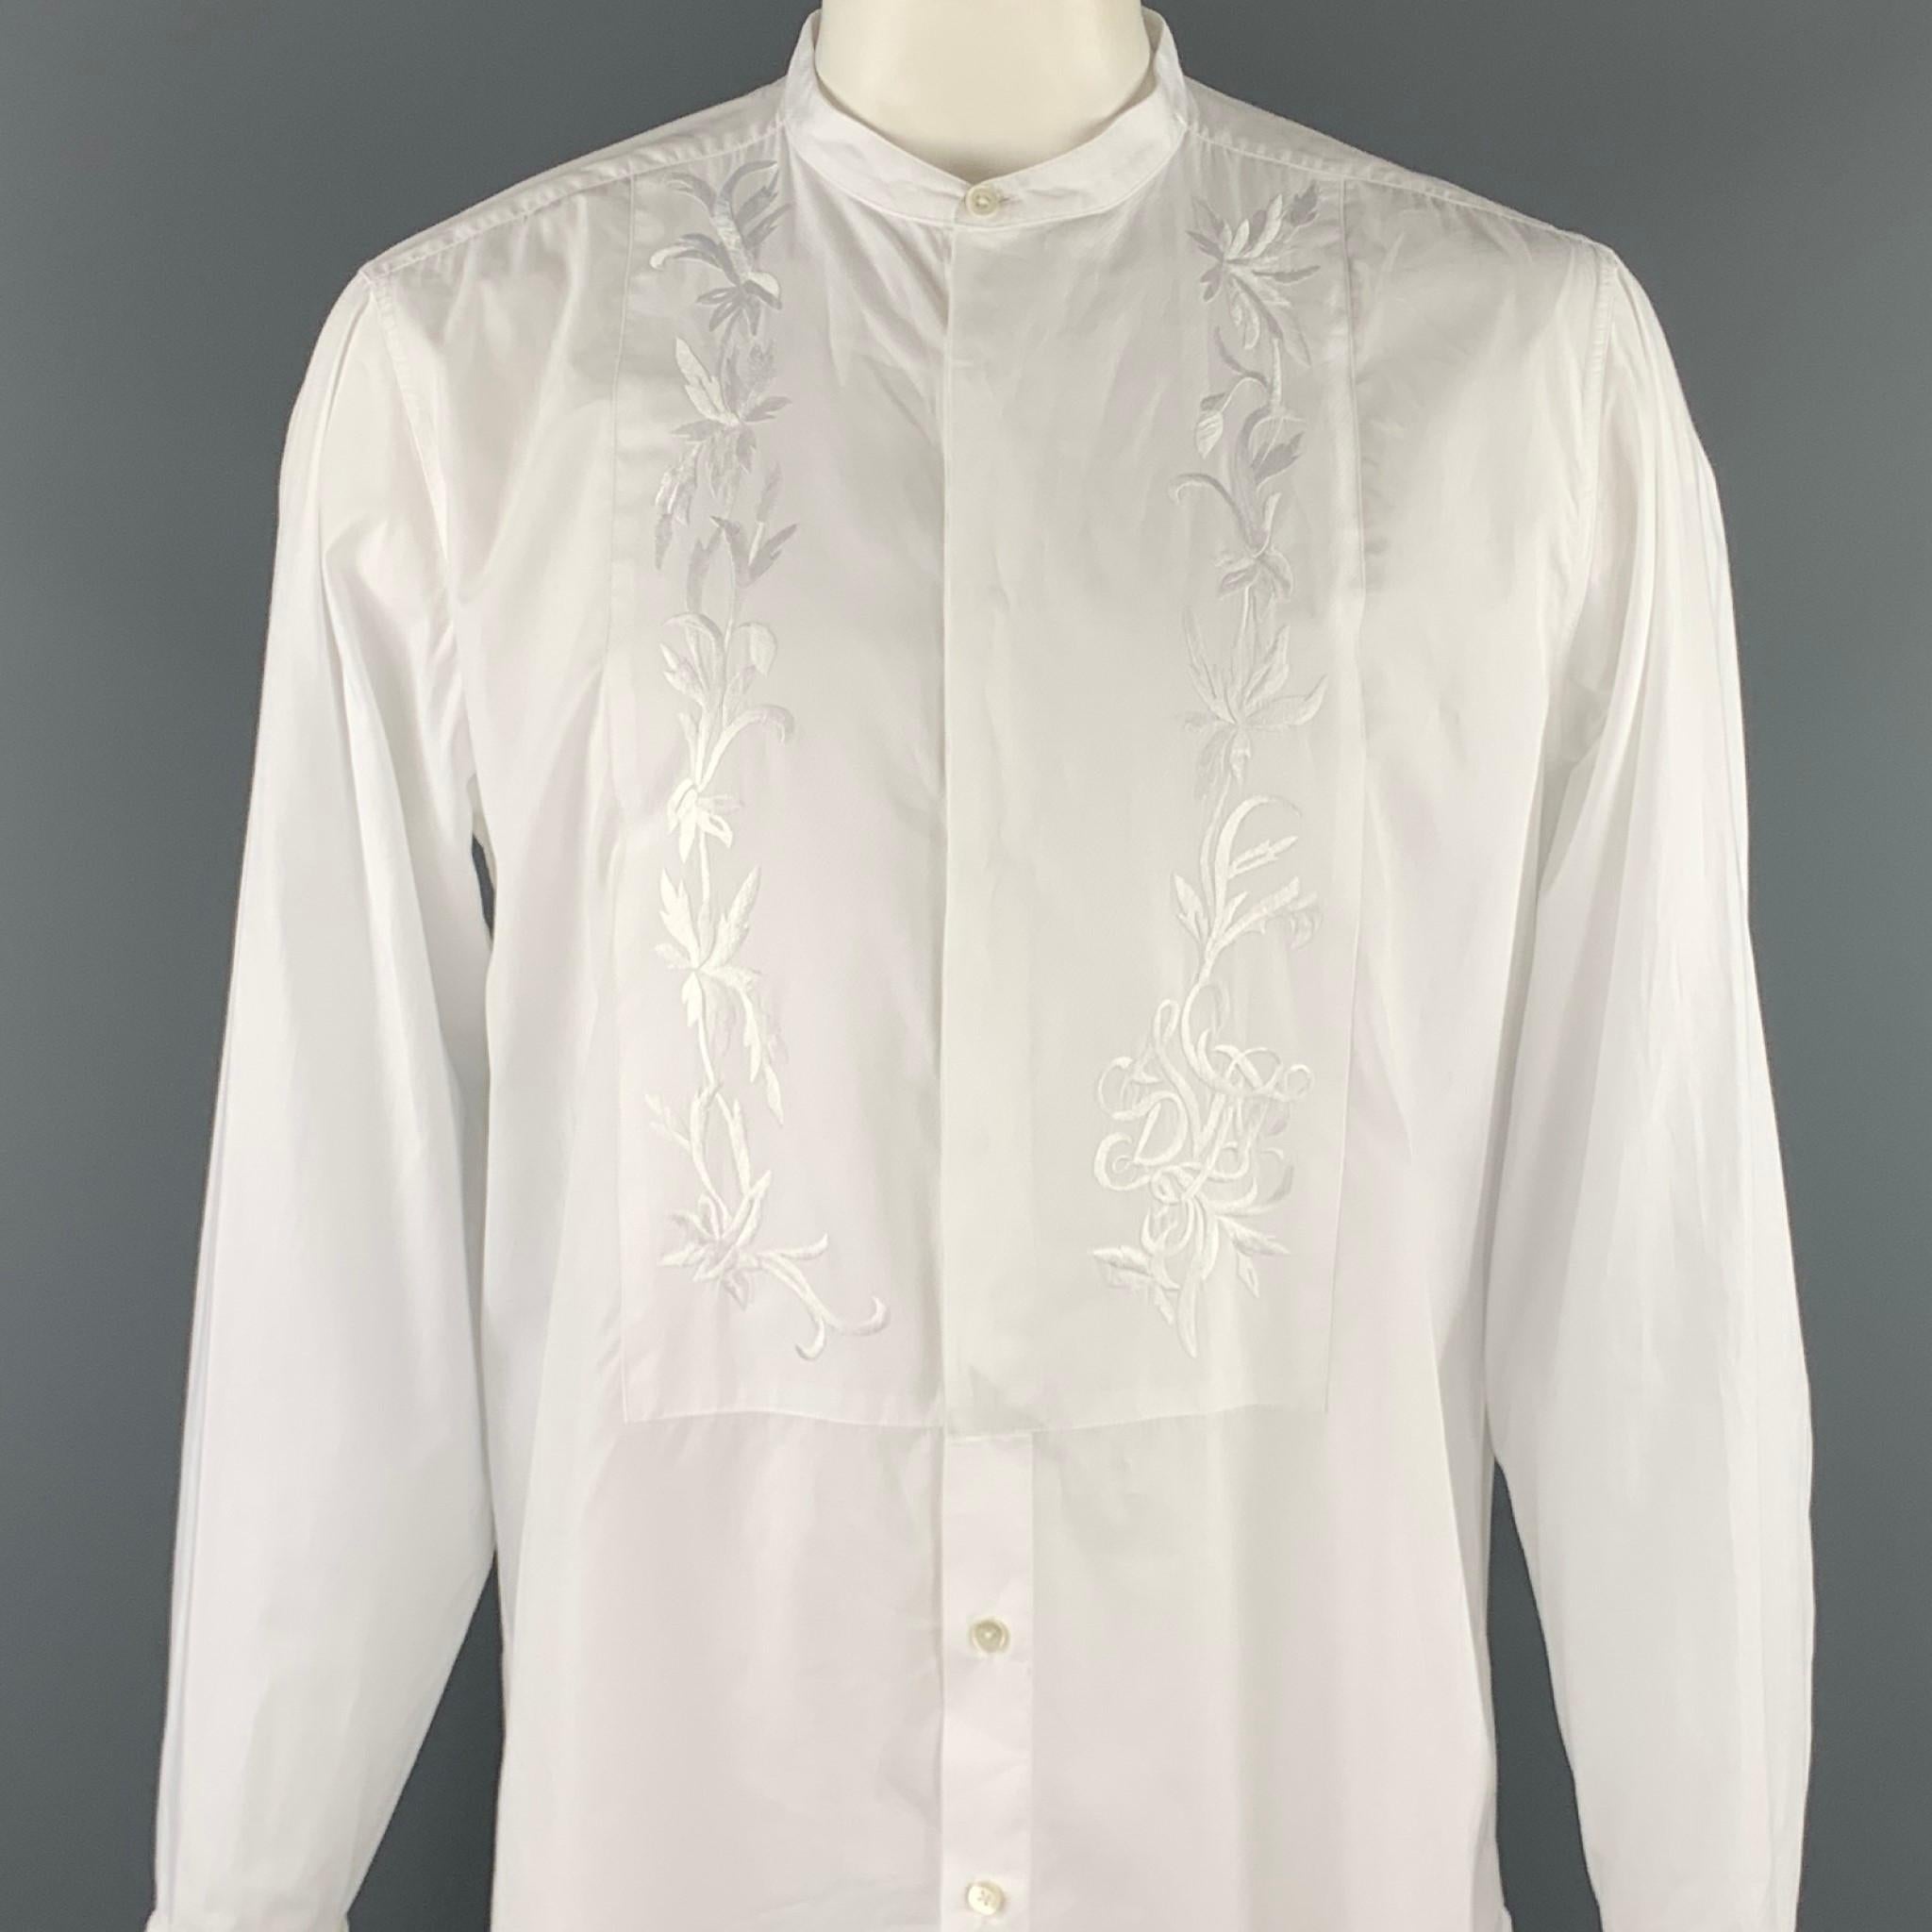 DRIES VAN NOTEN long sleeve shirt comes in a white cotton with front embroidered details featuring a button up style, french cuffs, and a nehru collar. Cufflinks not included. 

Excellent Pre-Owned Condition.
Marked: 54

Measurements:

Shoulder: 19